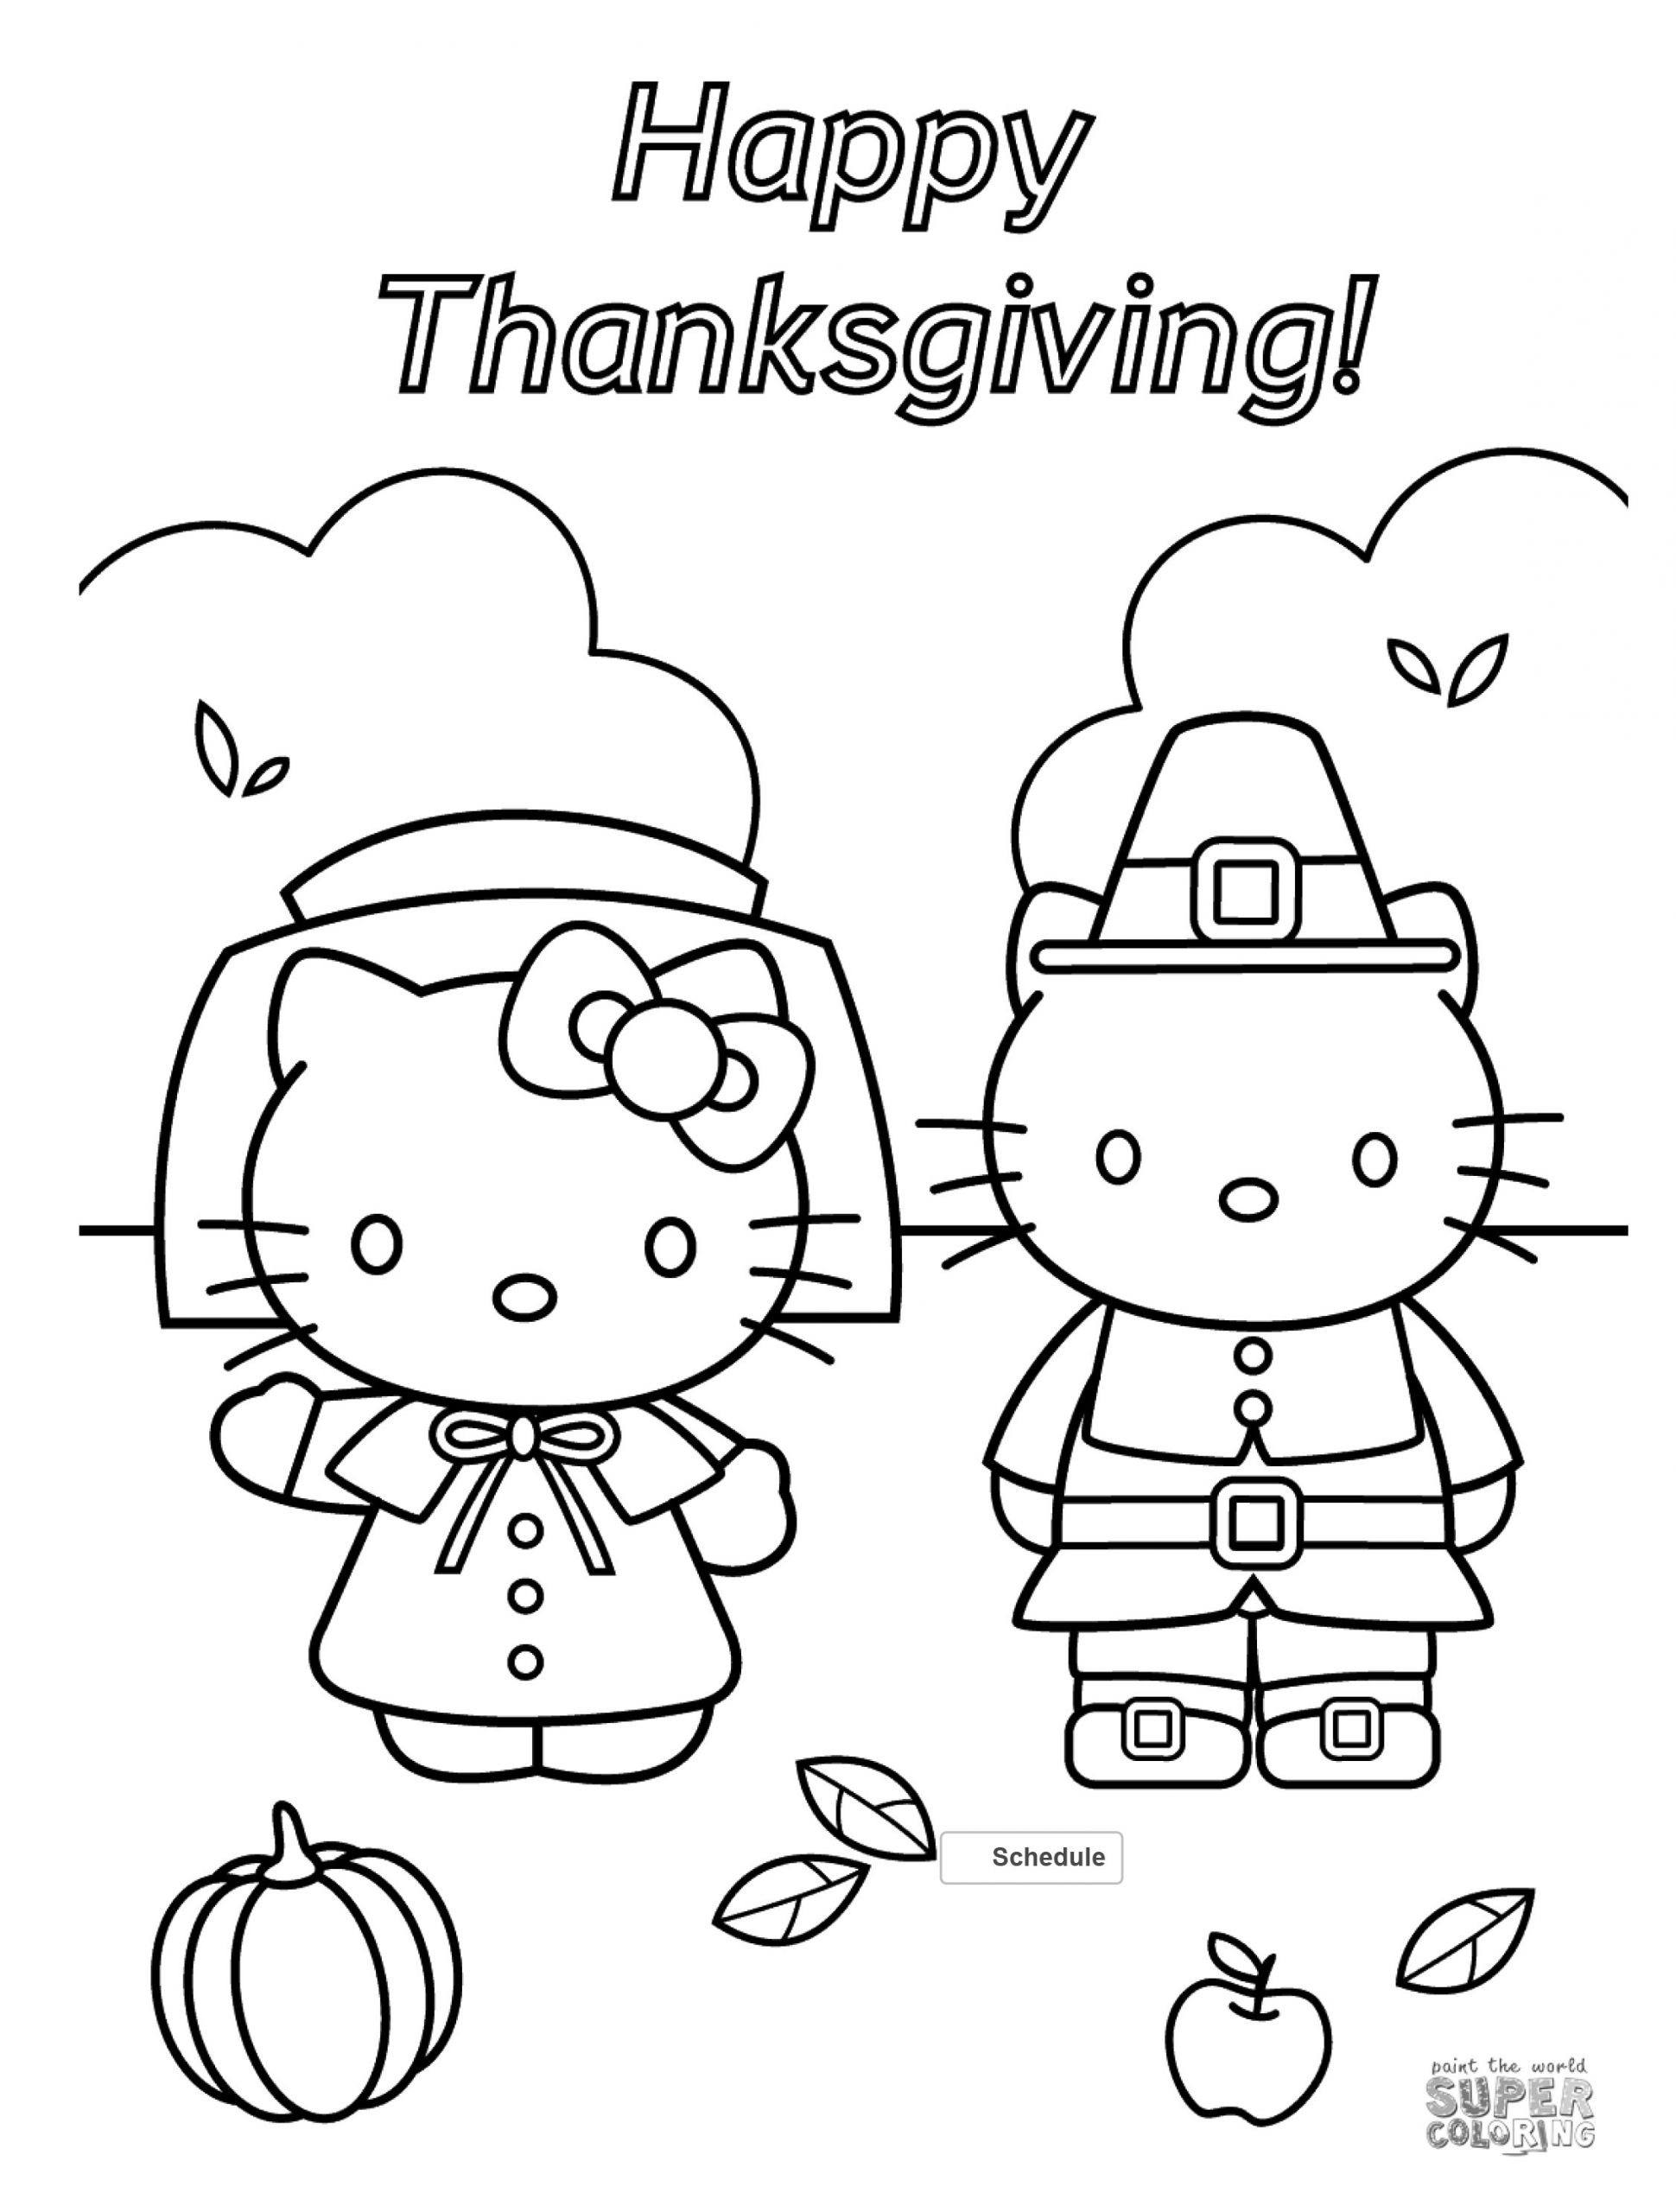 Thanksgiving Kids Coloring Pages
 FREE Thanksgiving Coloring Pages for Adults & Kids